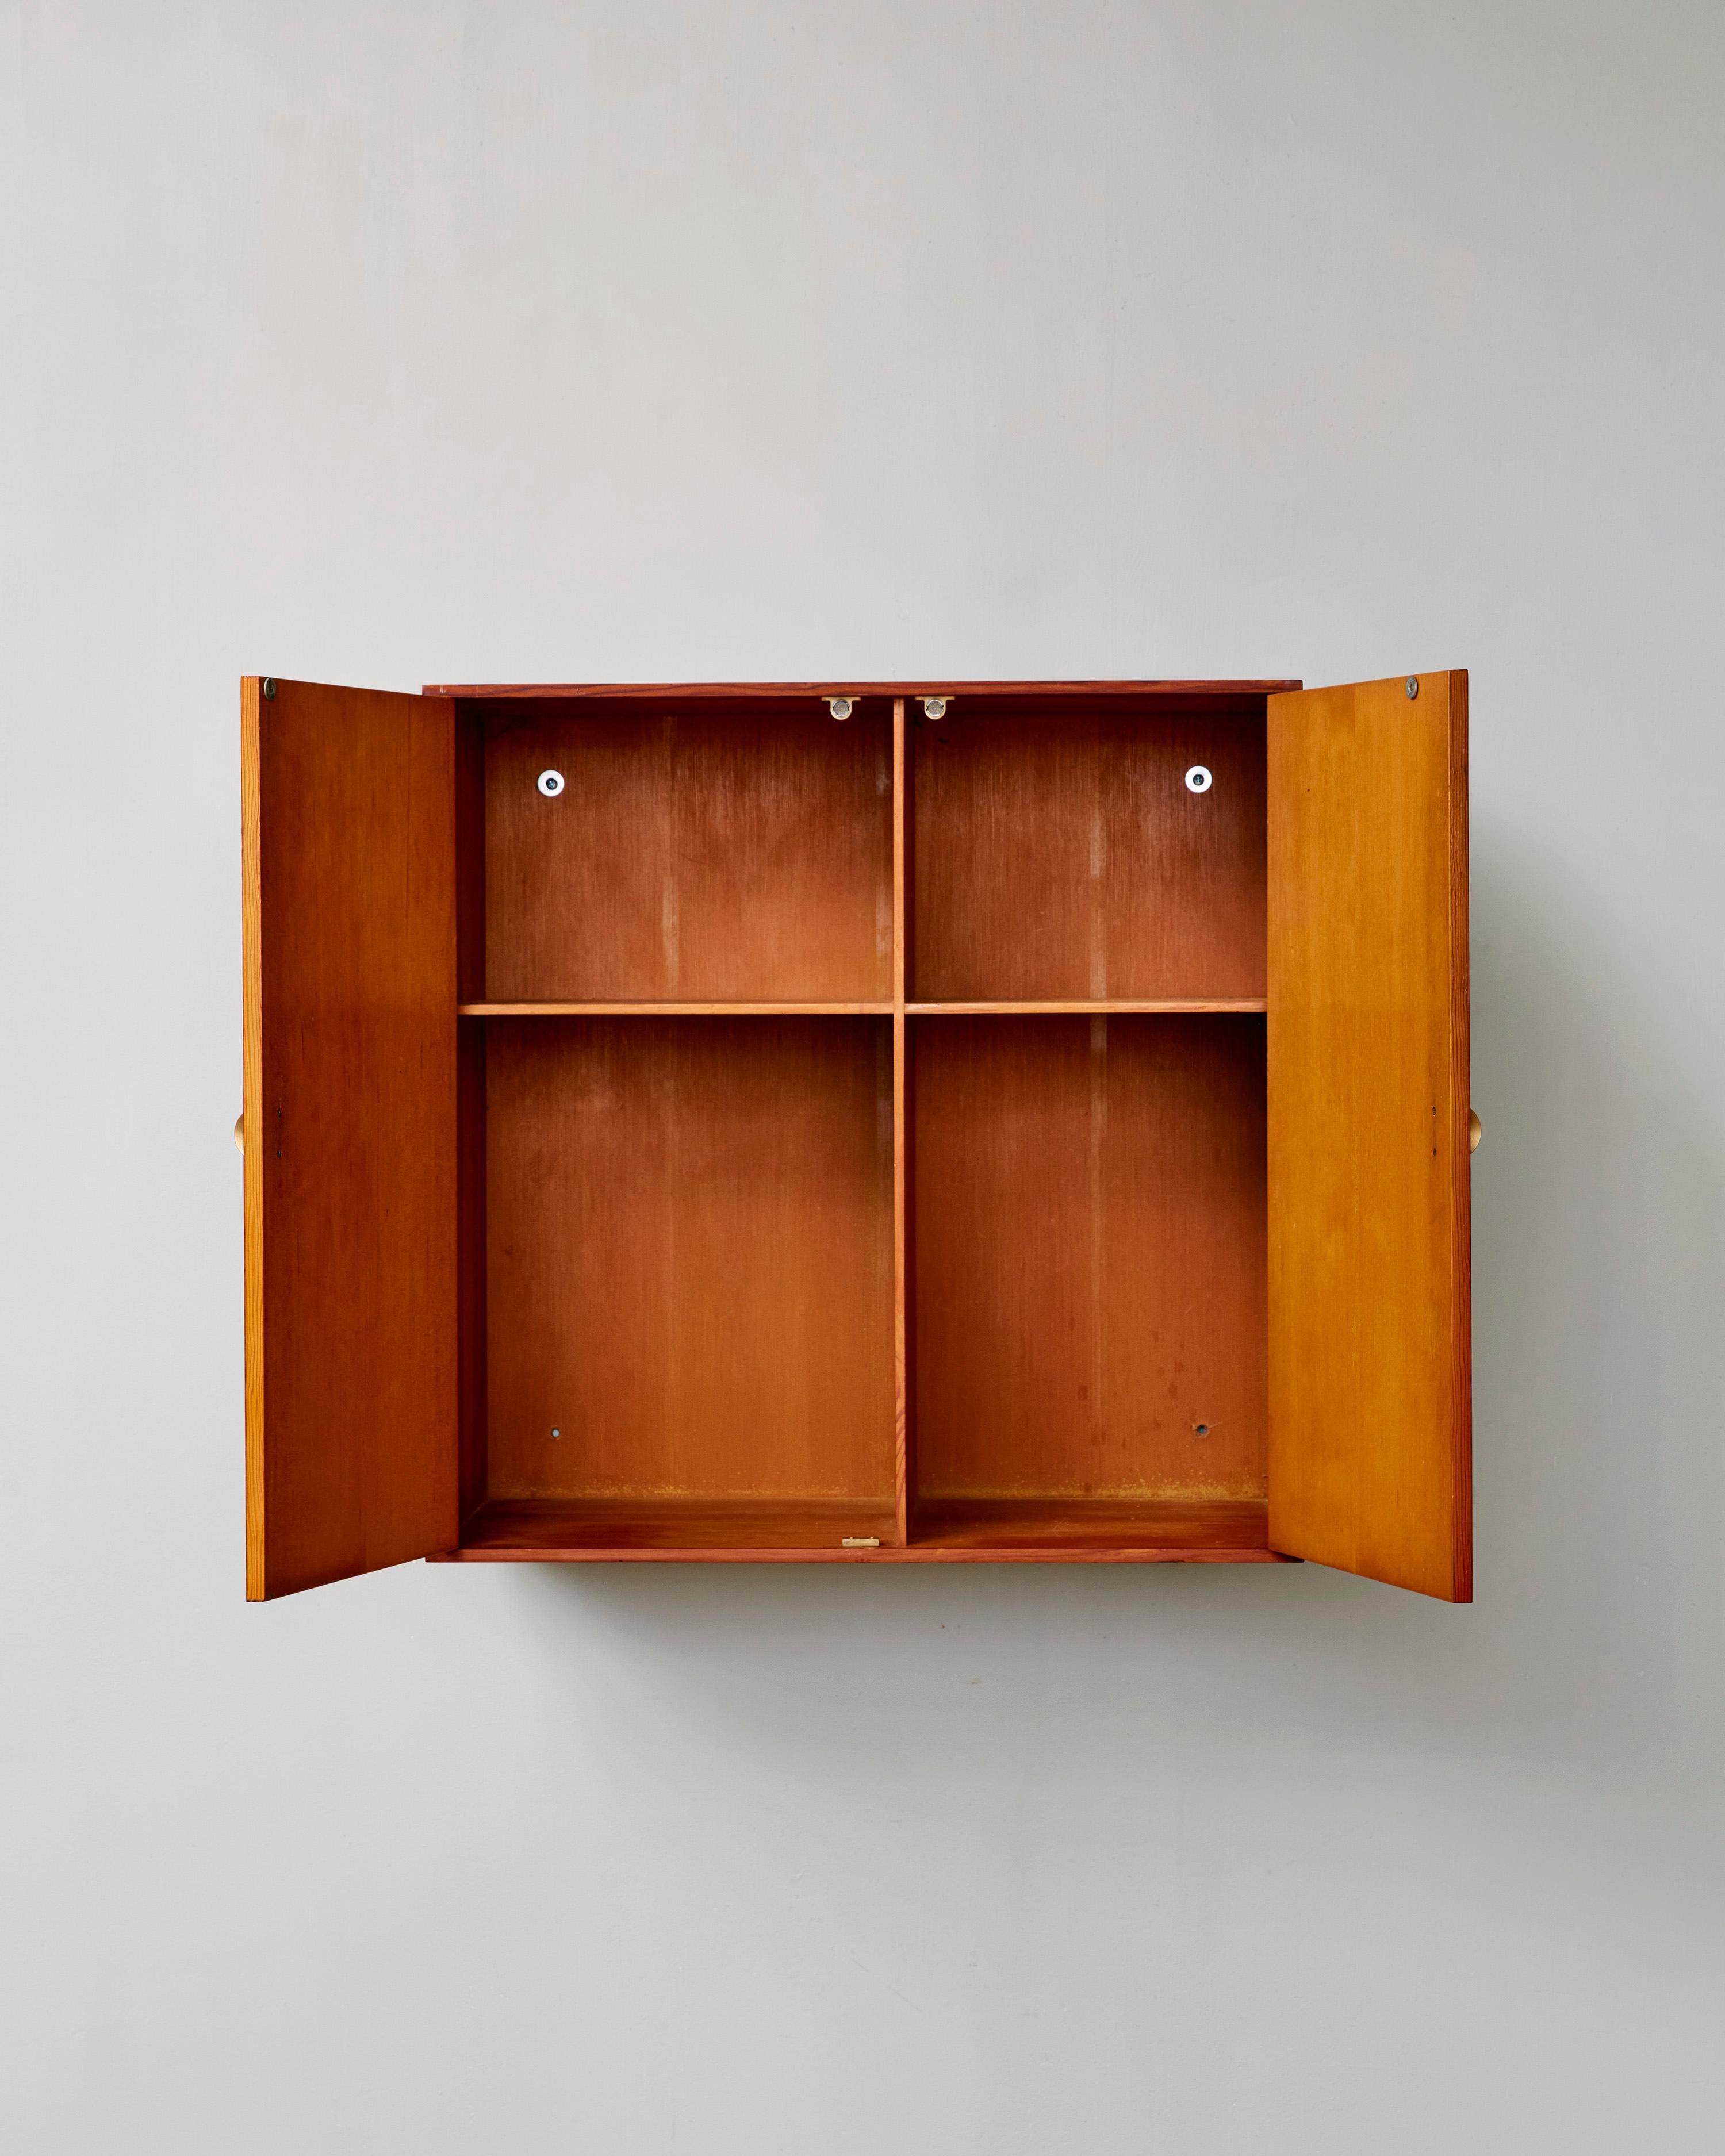 Rare Danish Floating Pine Cabinet with brass handles and double-sided shelving.

